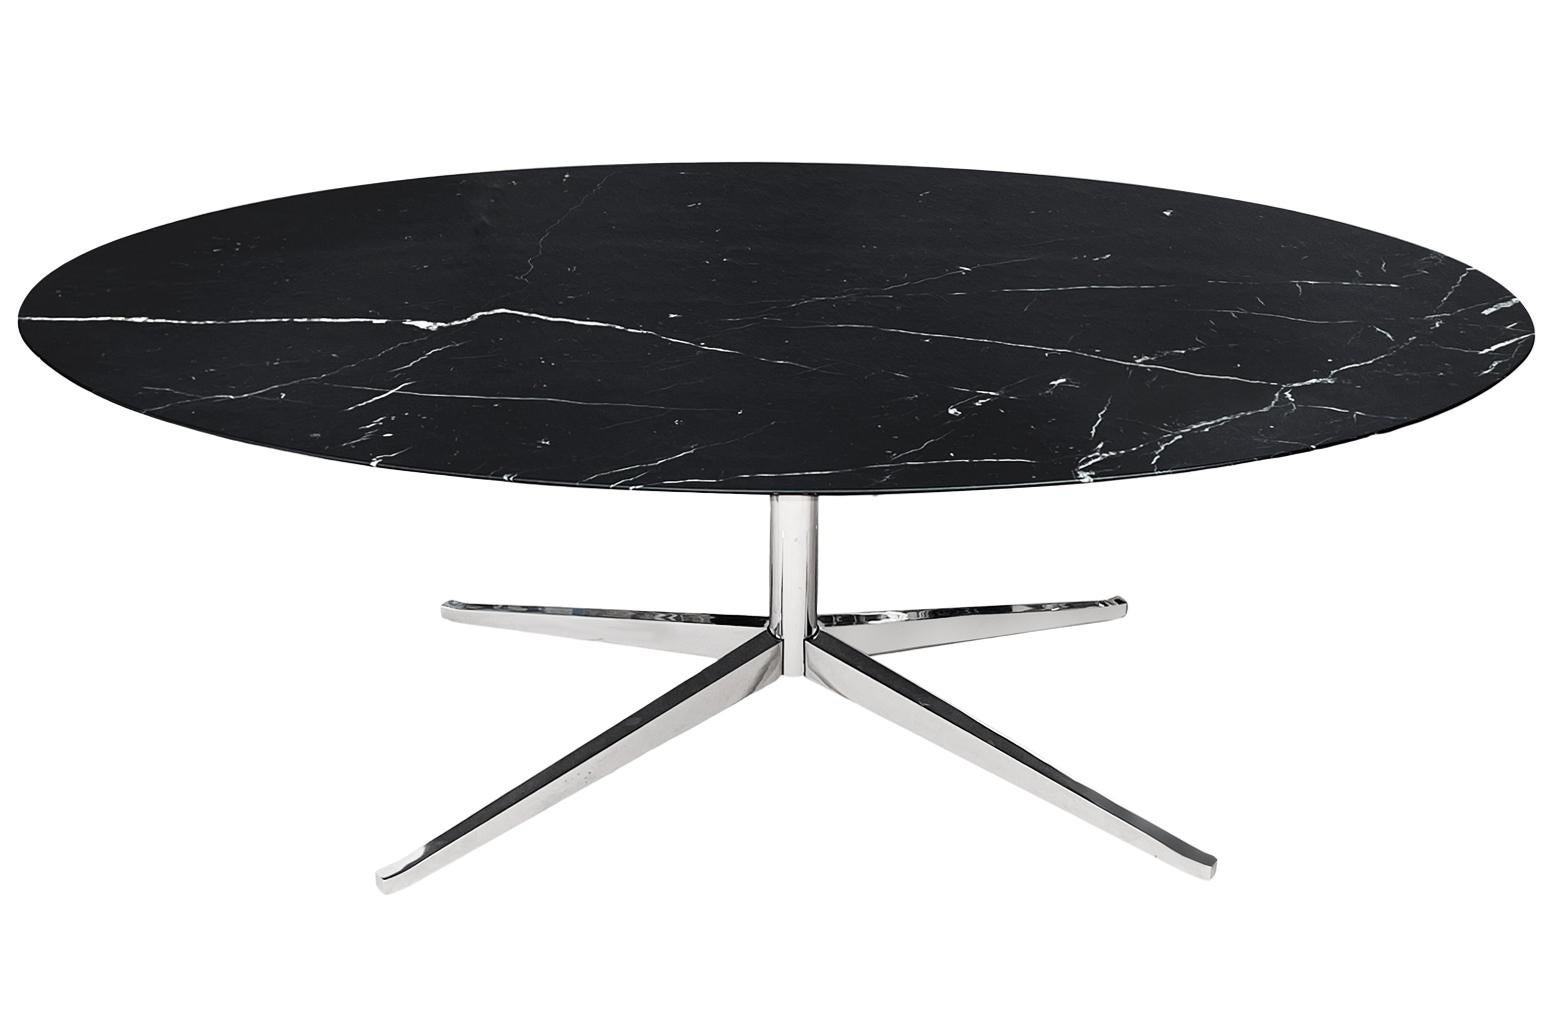 Late 20th Century Mid-Century Modern Oval Marble Dining Table or Desk by Florence Knoll for Knoll